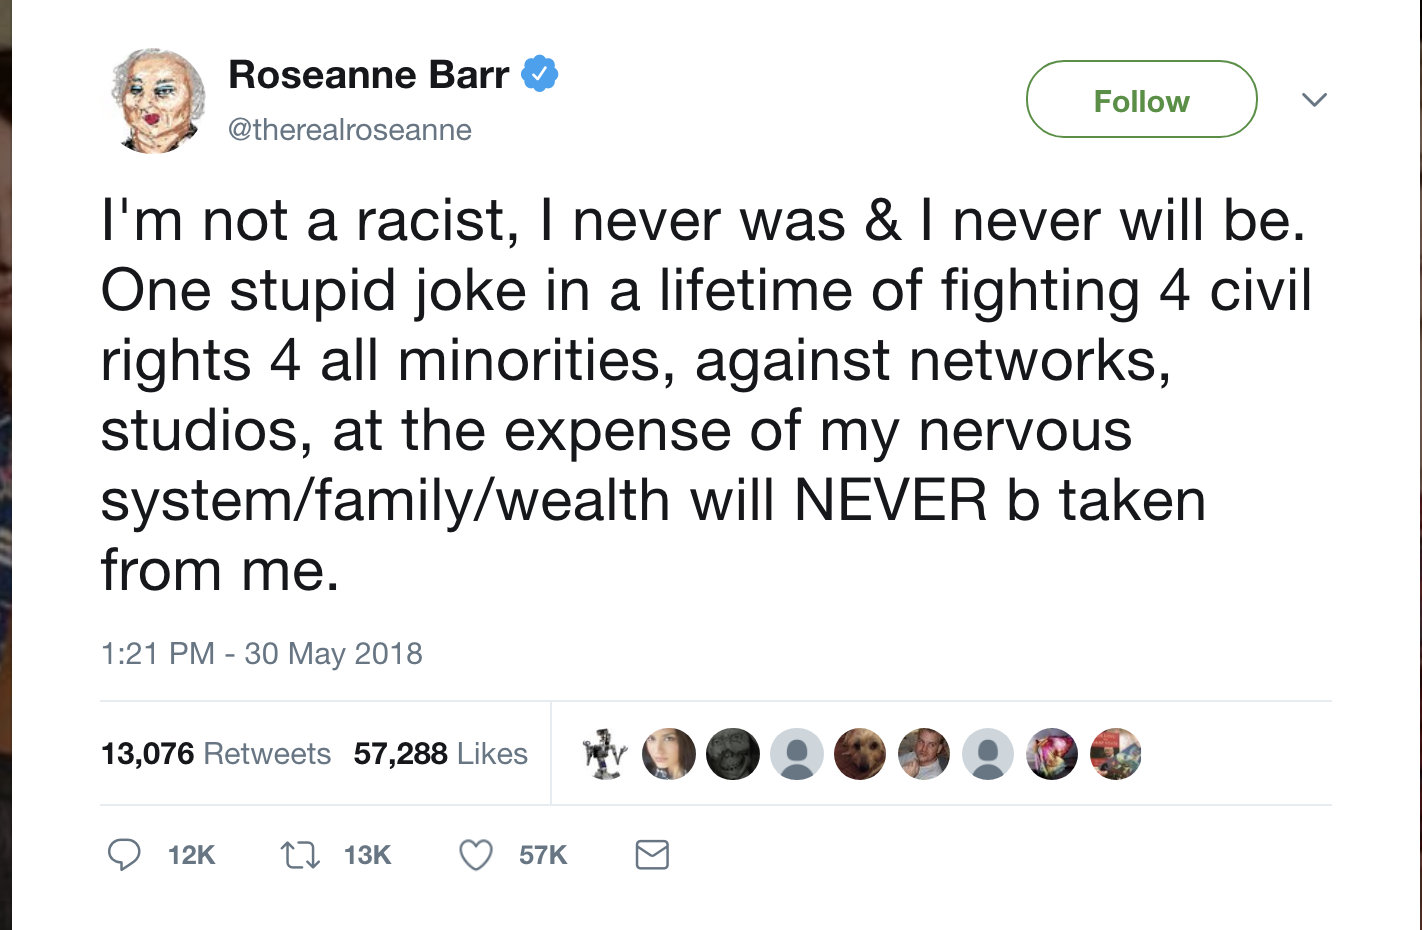 Screen-Shot-2018-05-31-at-8.55.16-AM Roseanne Makes ABC Cancellation Announcement - Makes A Fool Of Herself In Seconds Celebrities Donald Trump Media Politics Racism Social Media Top Stories 